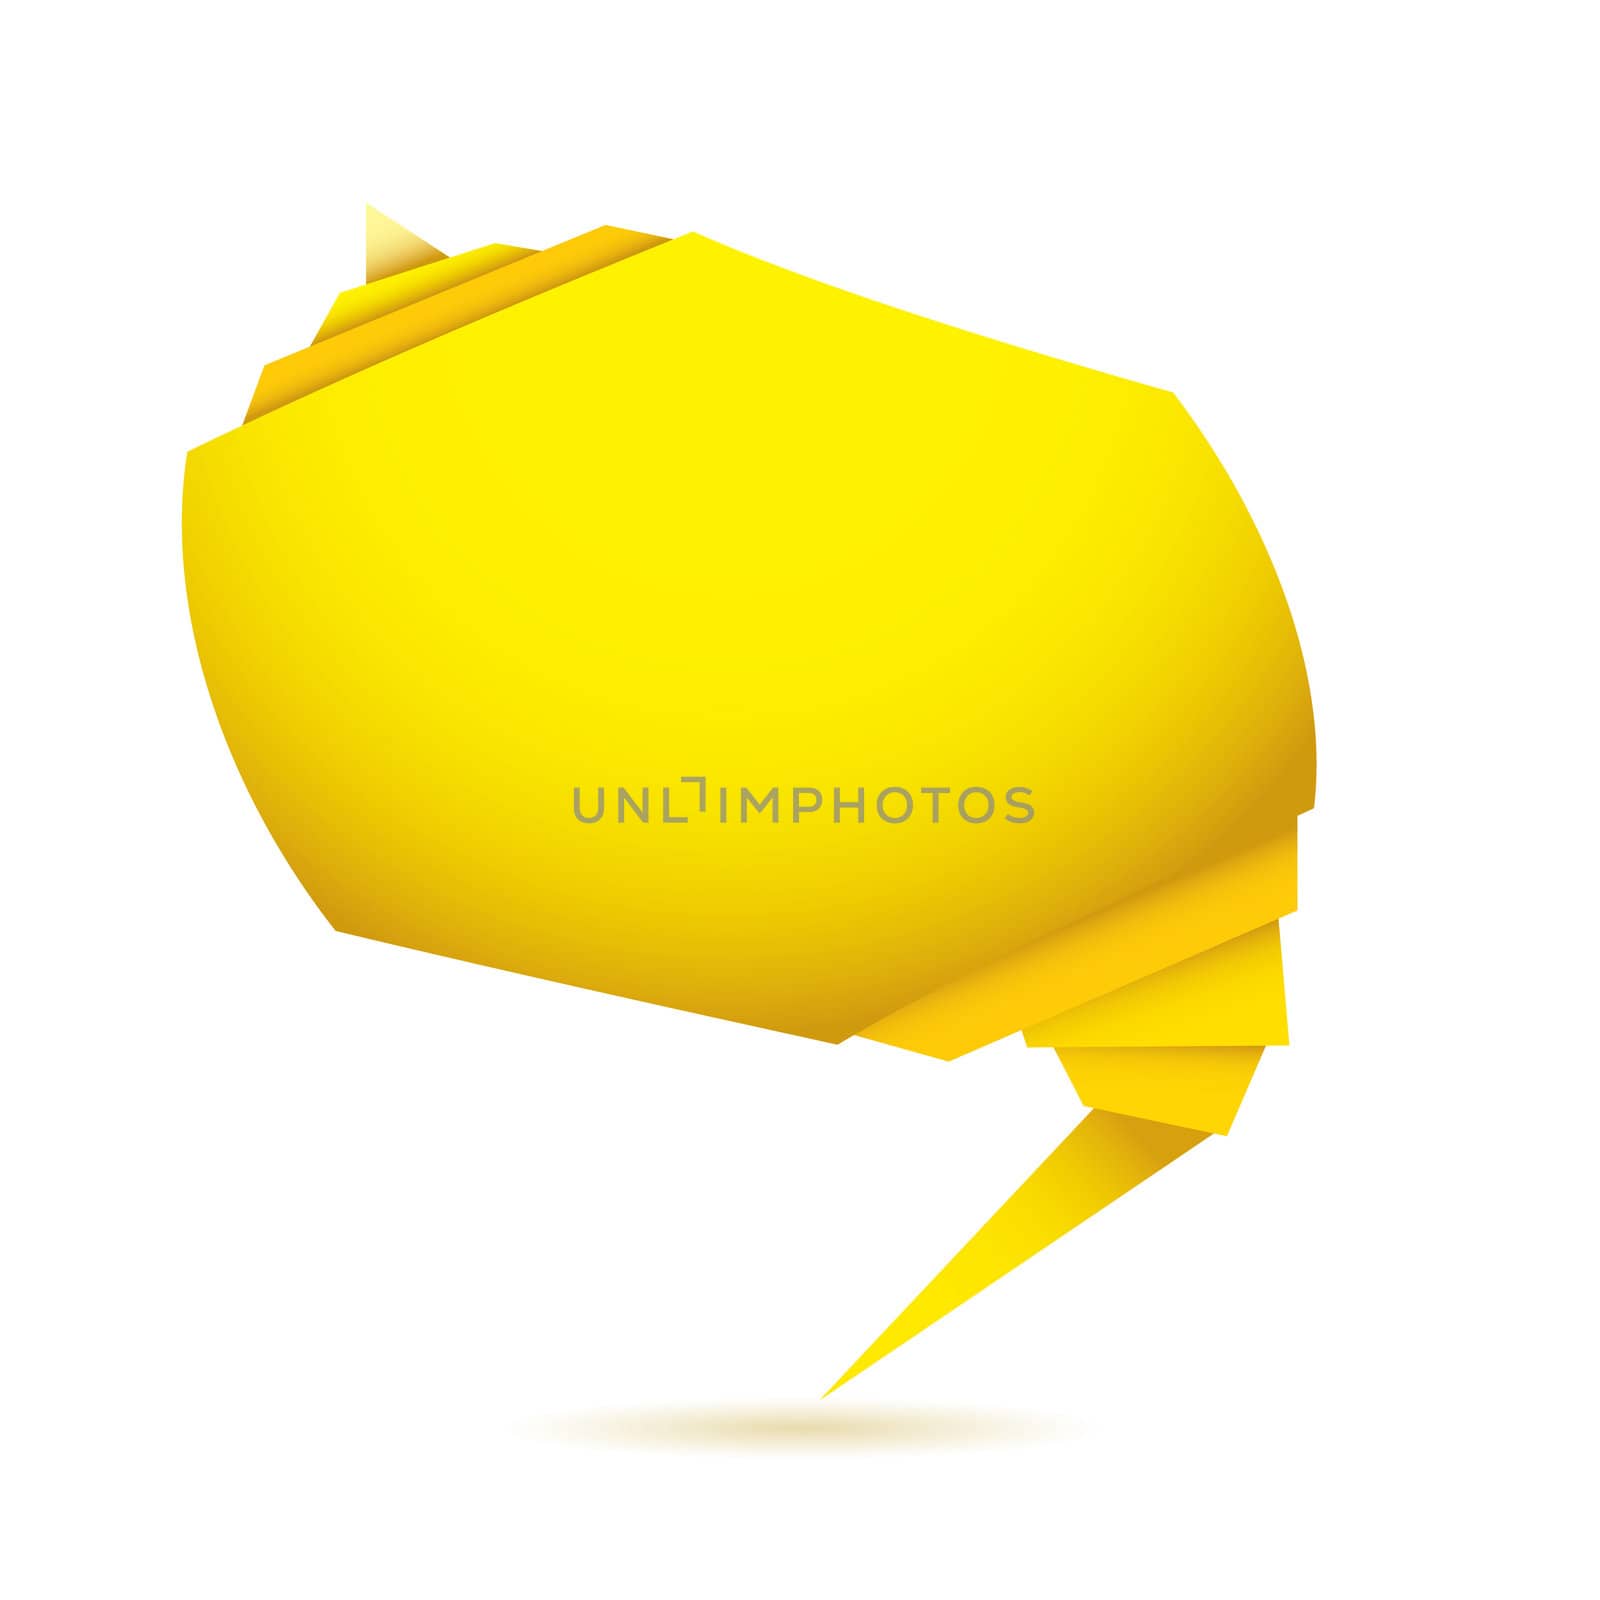 Origami element with yellow copy space and white background